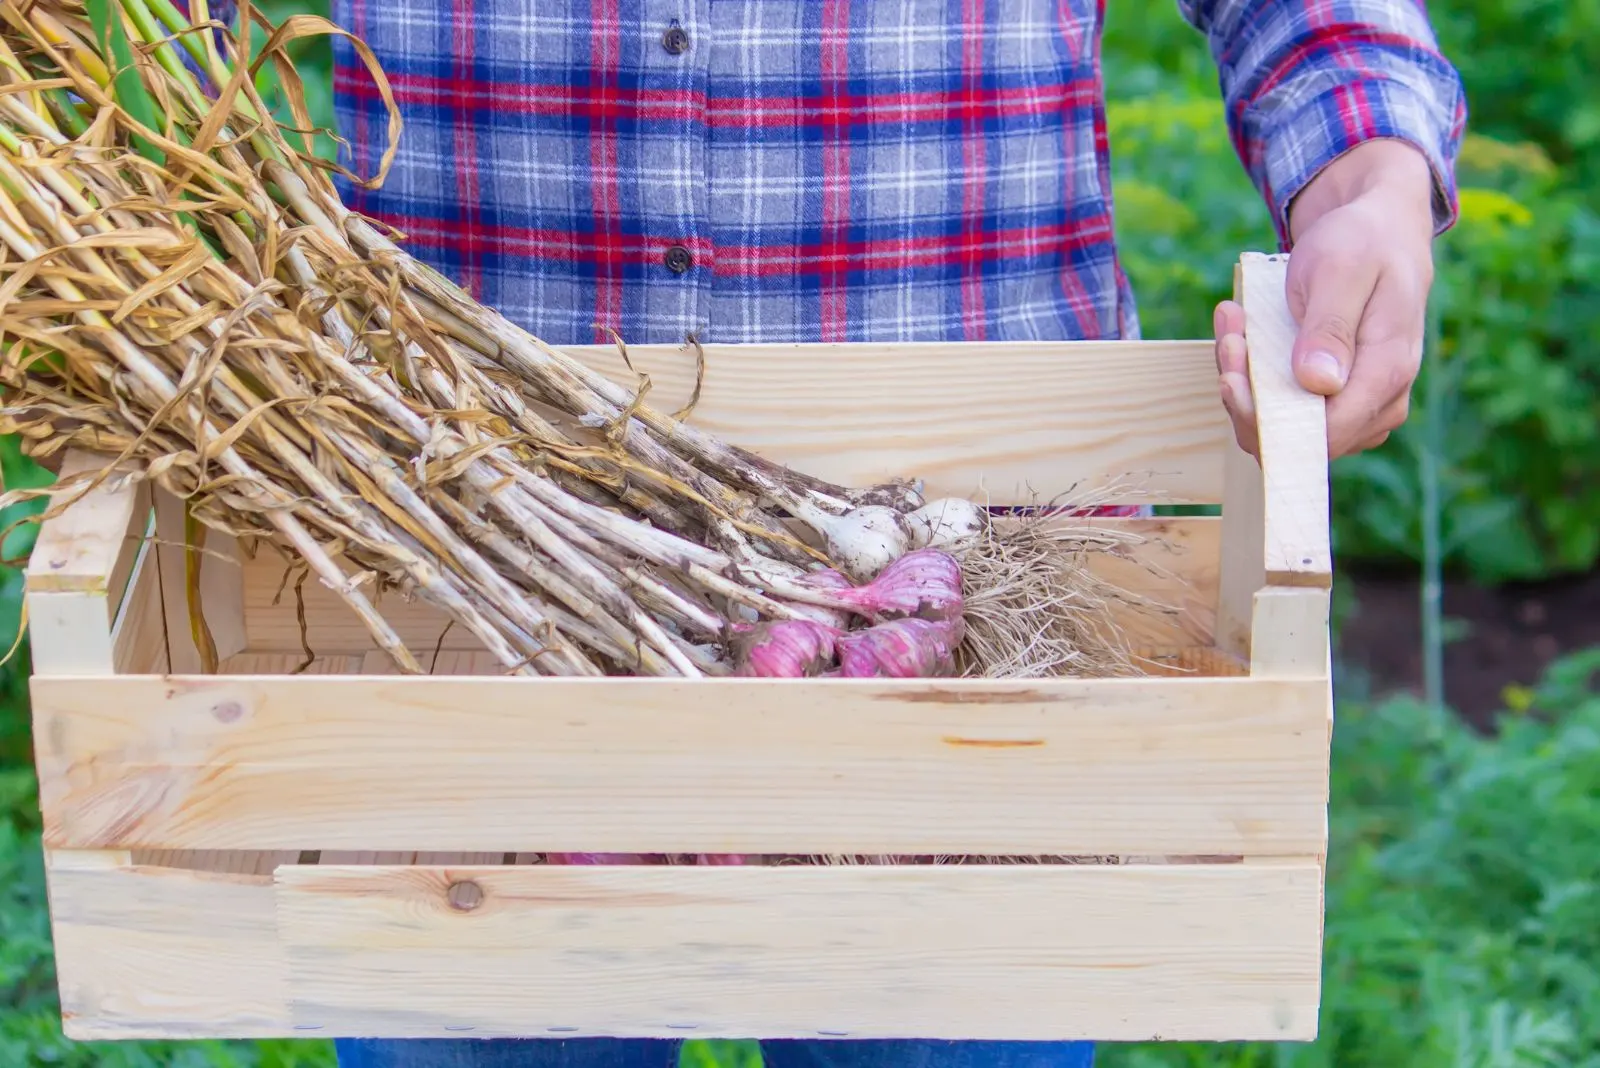 the woman keeps garlic in a crate